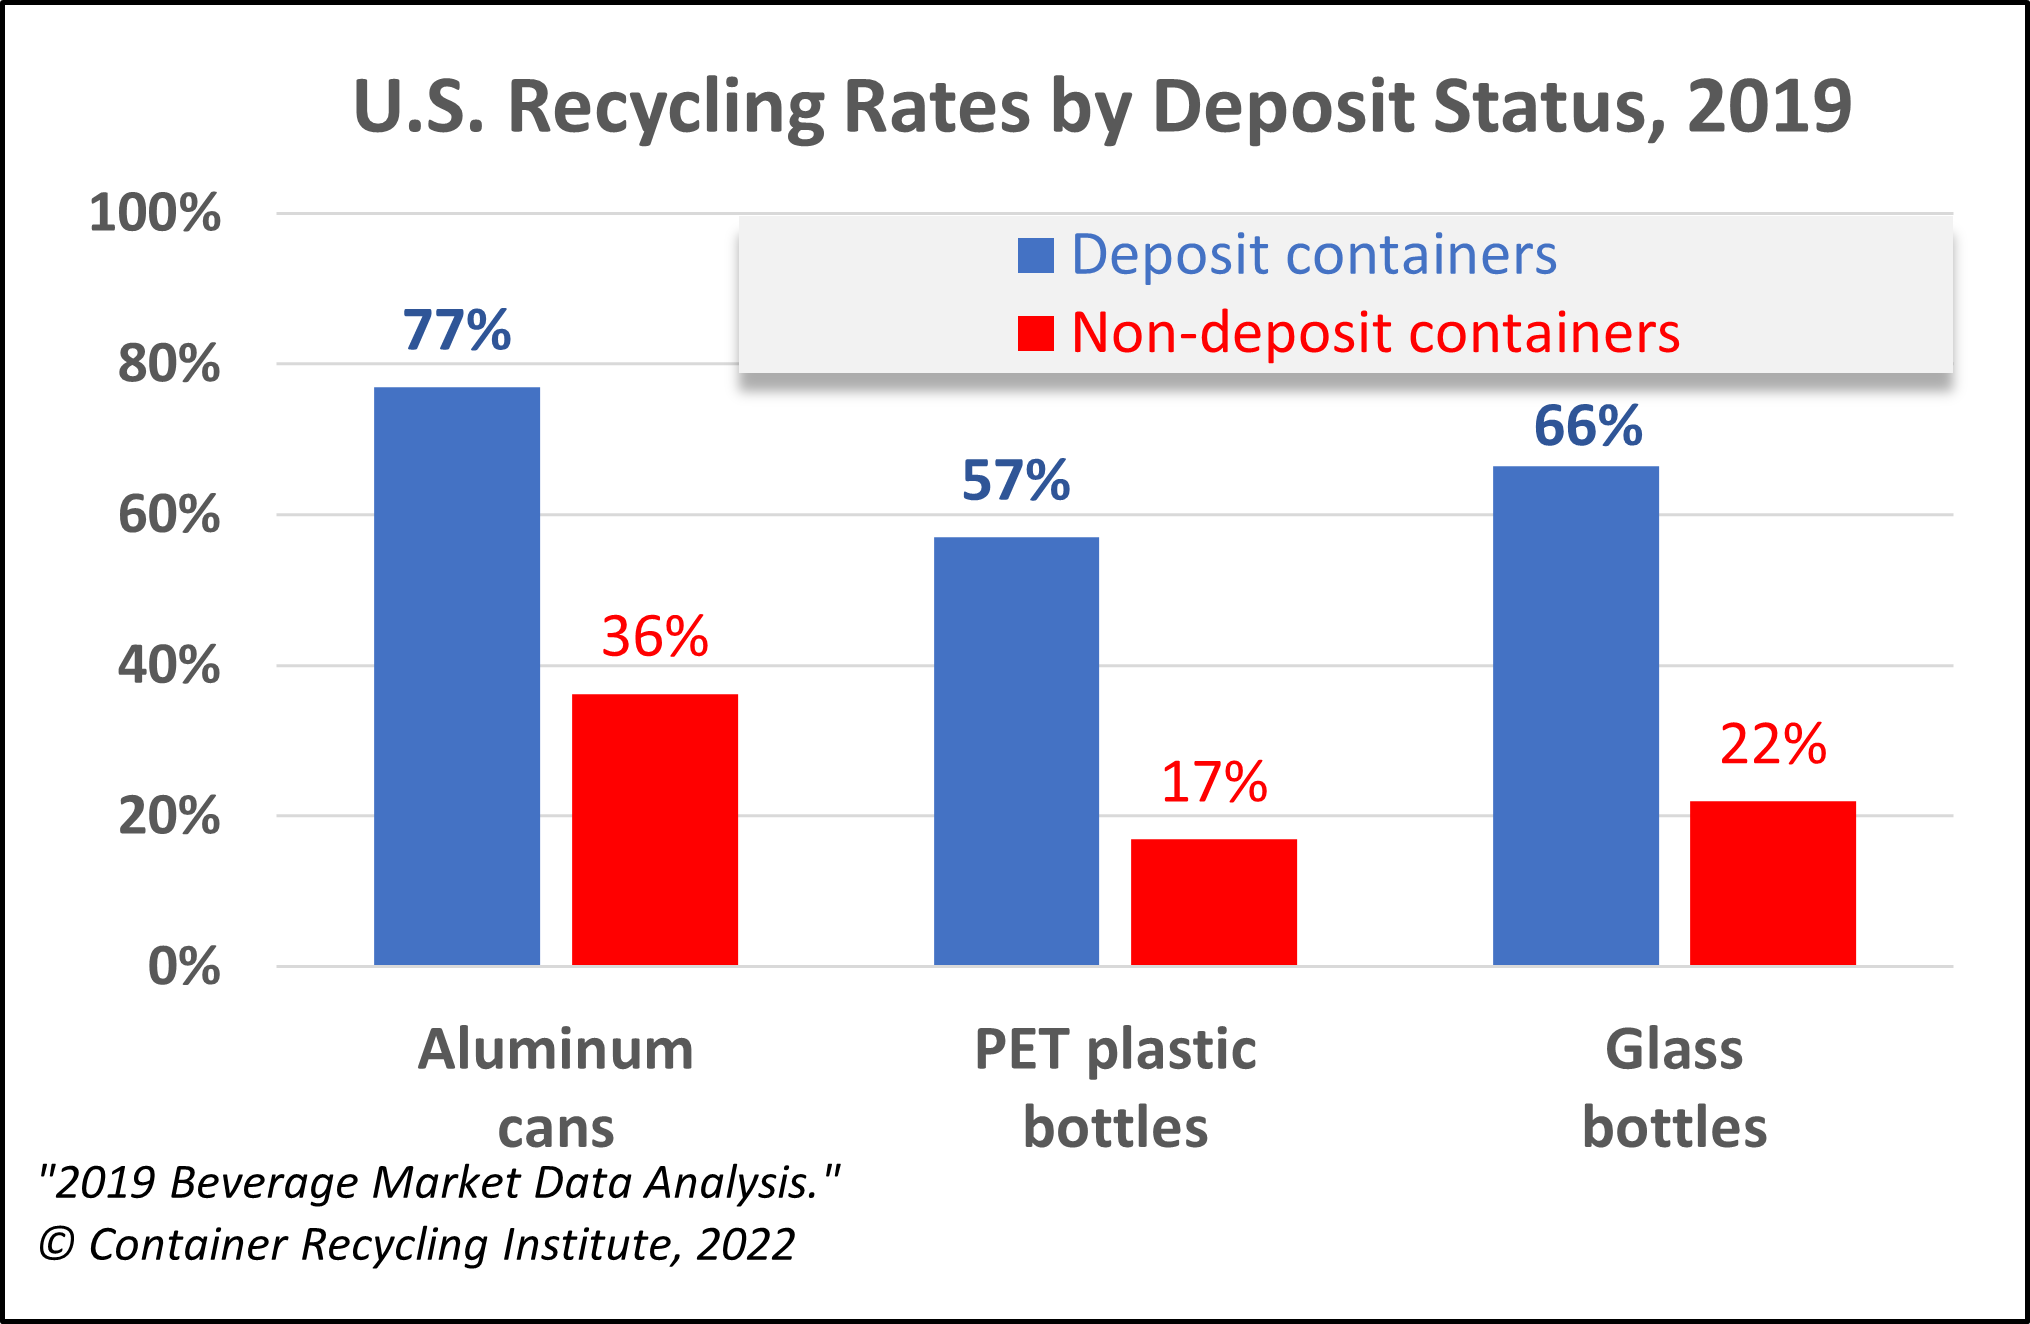 Bar chart showing U.S. Recycling Rates by Deposit Status, 2019